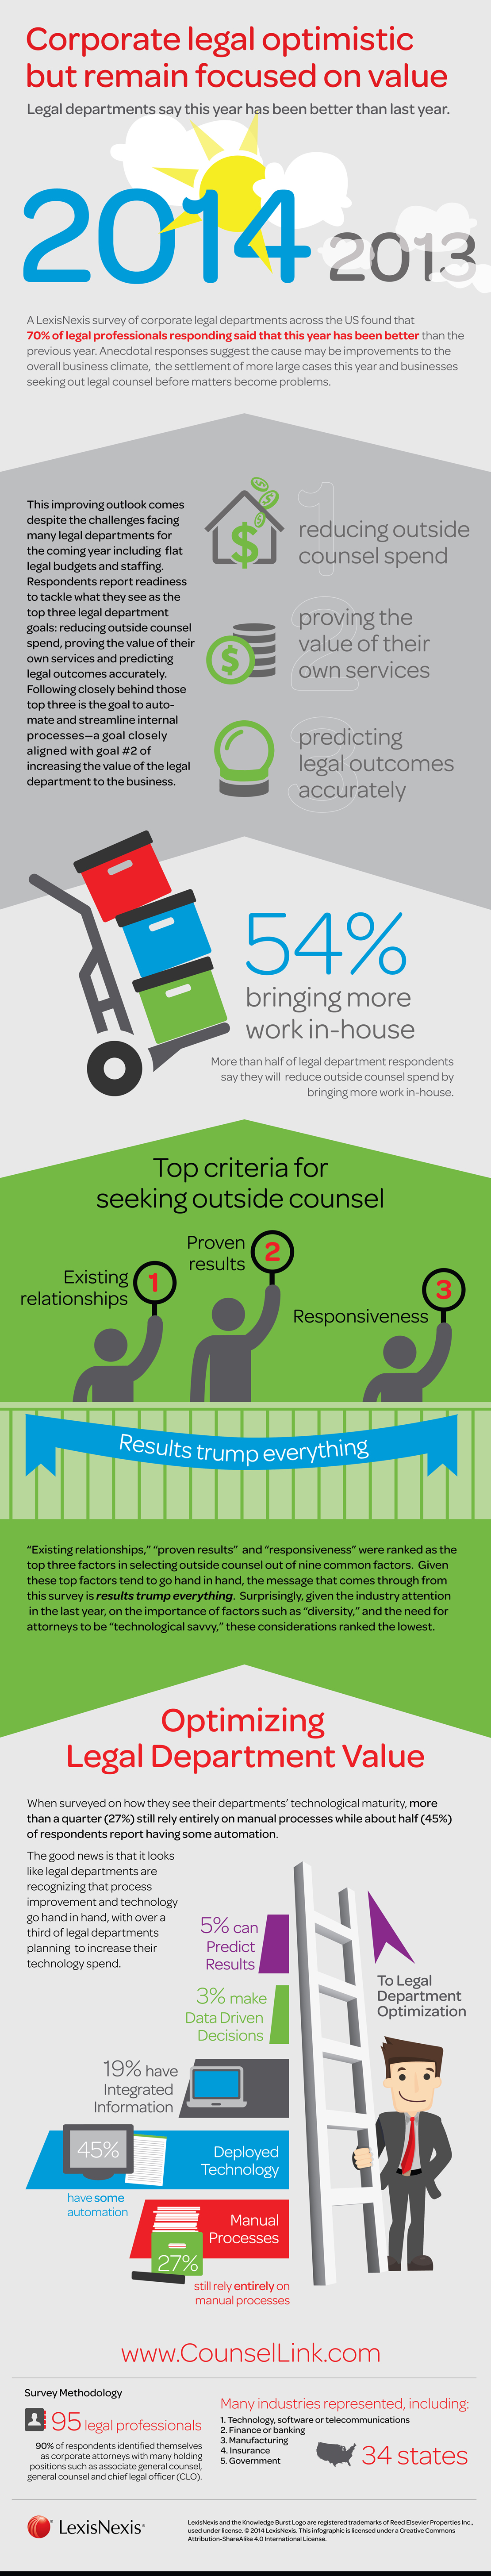 Infographic:  LexisNexis CounselLink Survey Finds Renewed Optimism in Corporate Legal